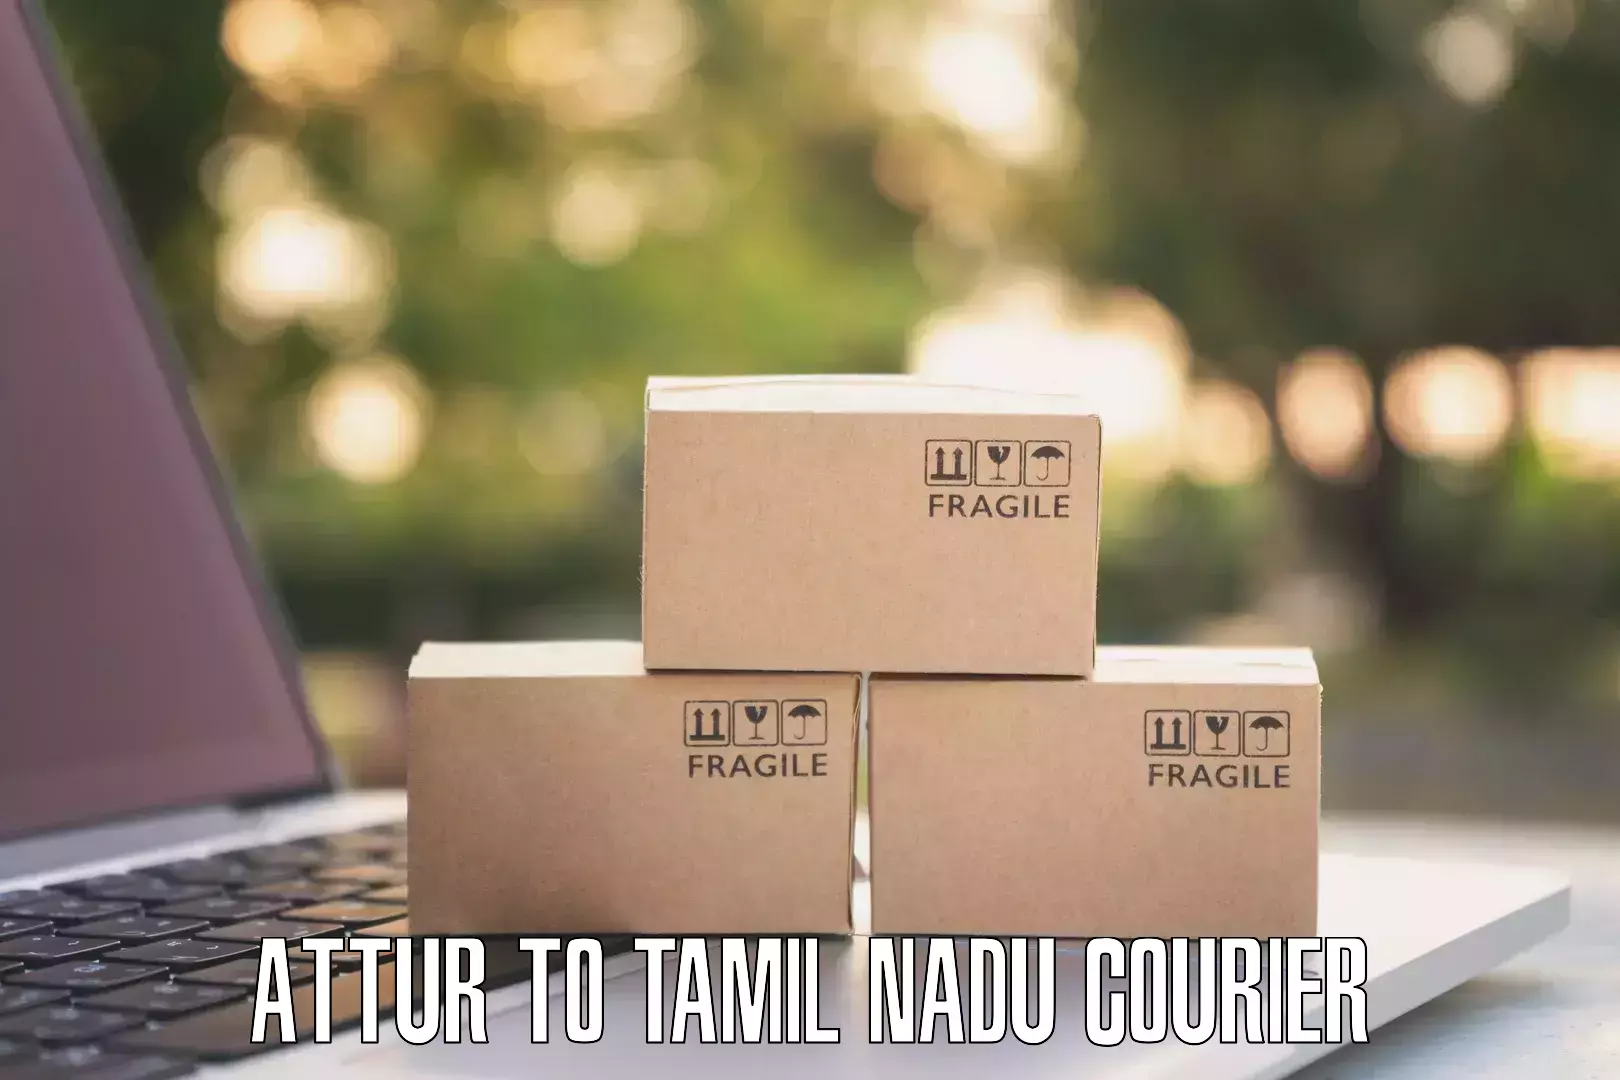 Cost-effective courier options Attur to Melur